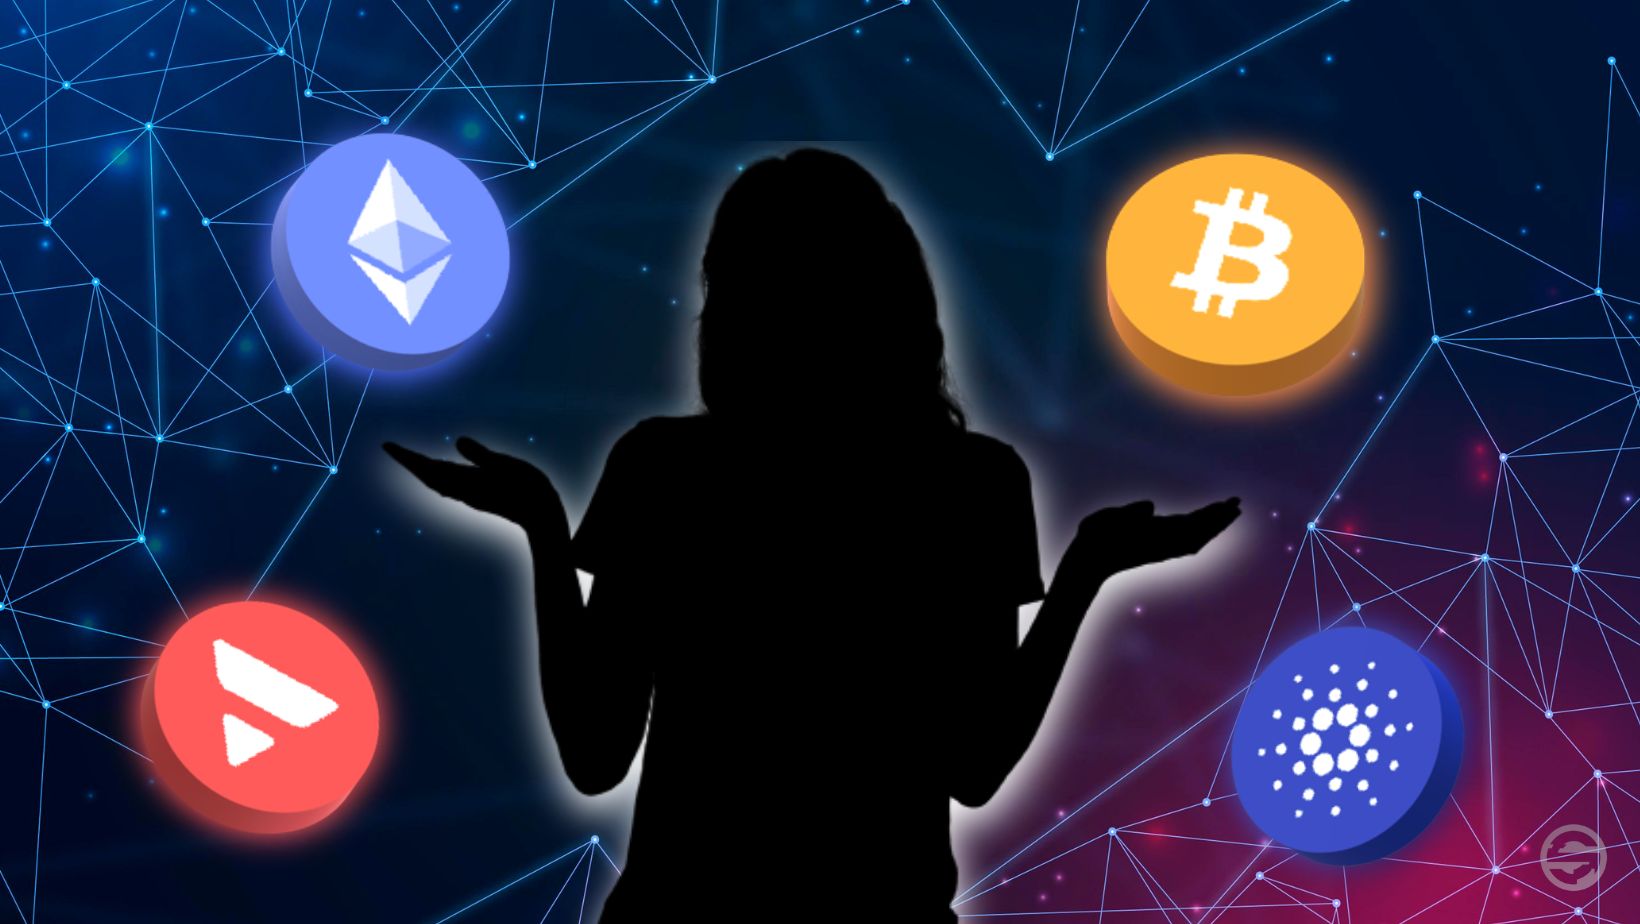 Are you interested in buying cryptocurrencies? Here are some tips before you invest